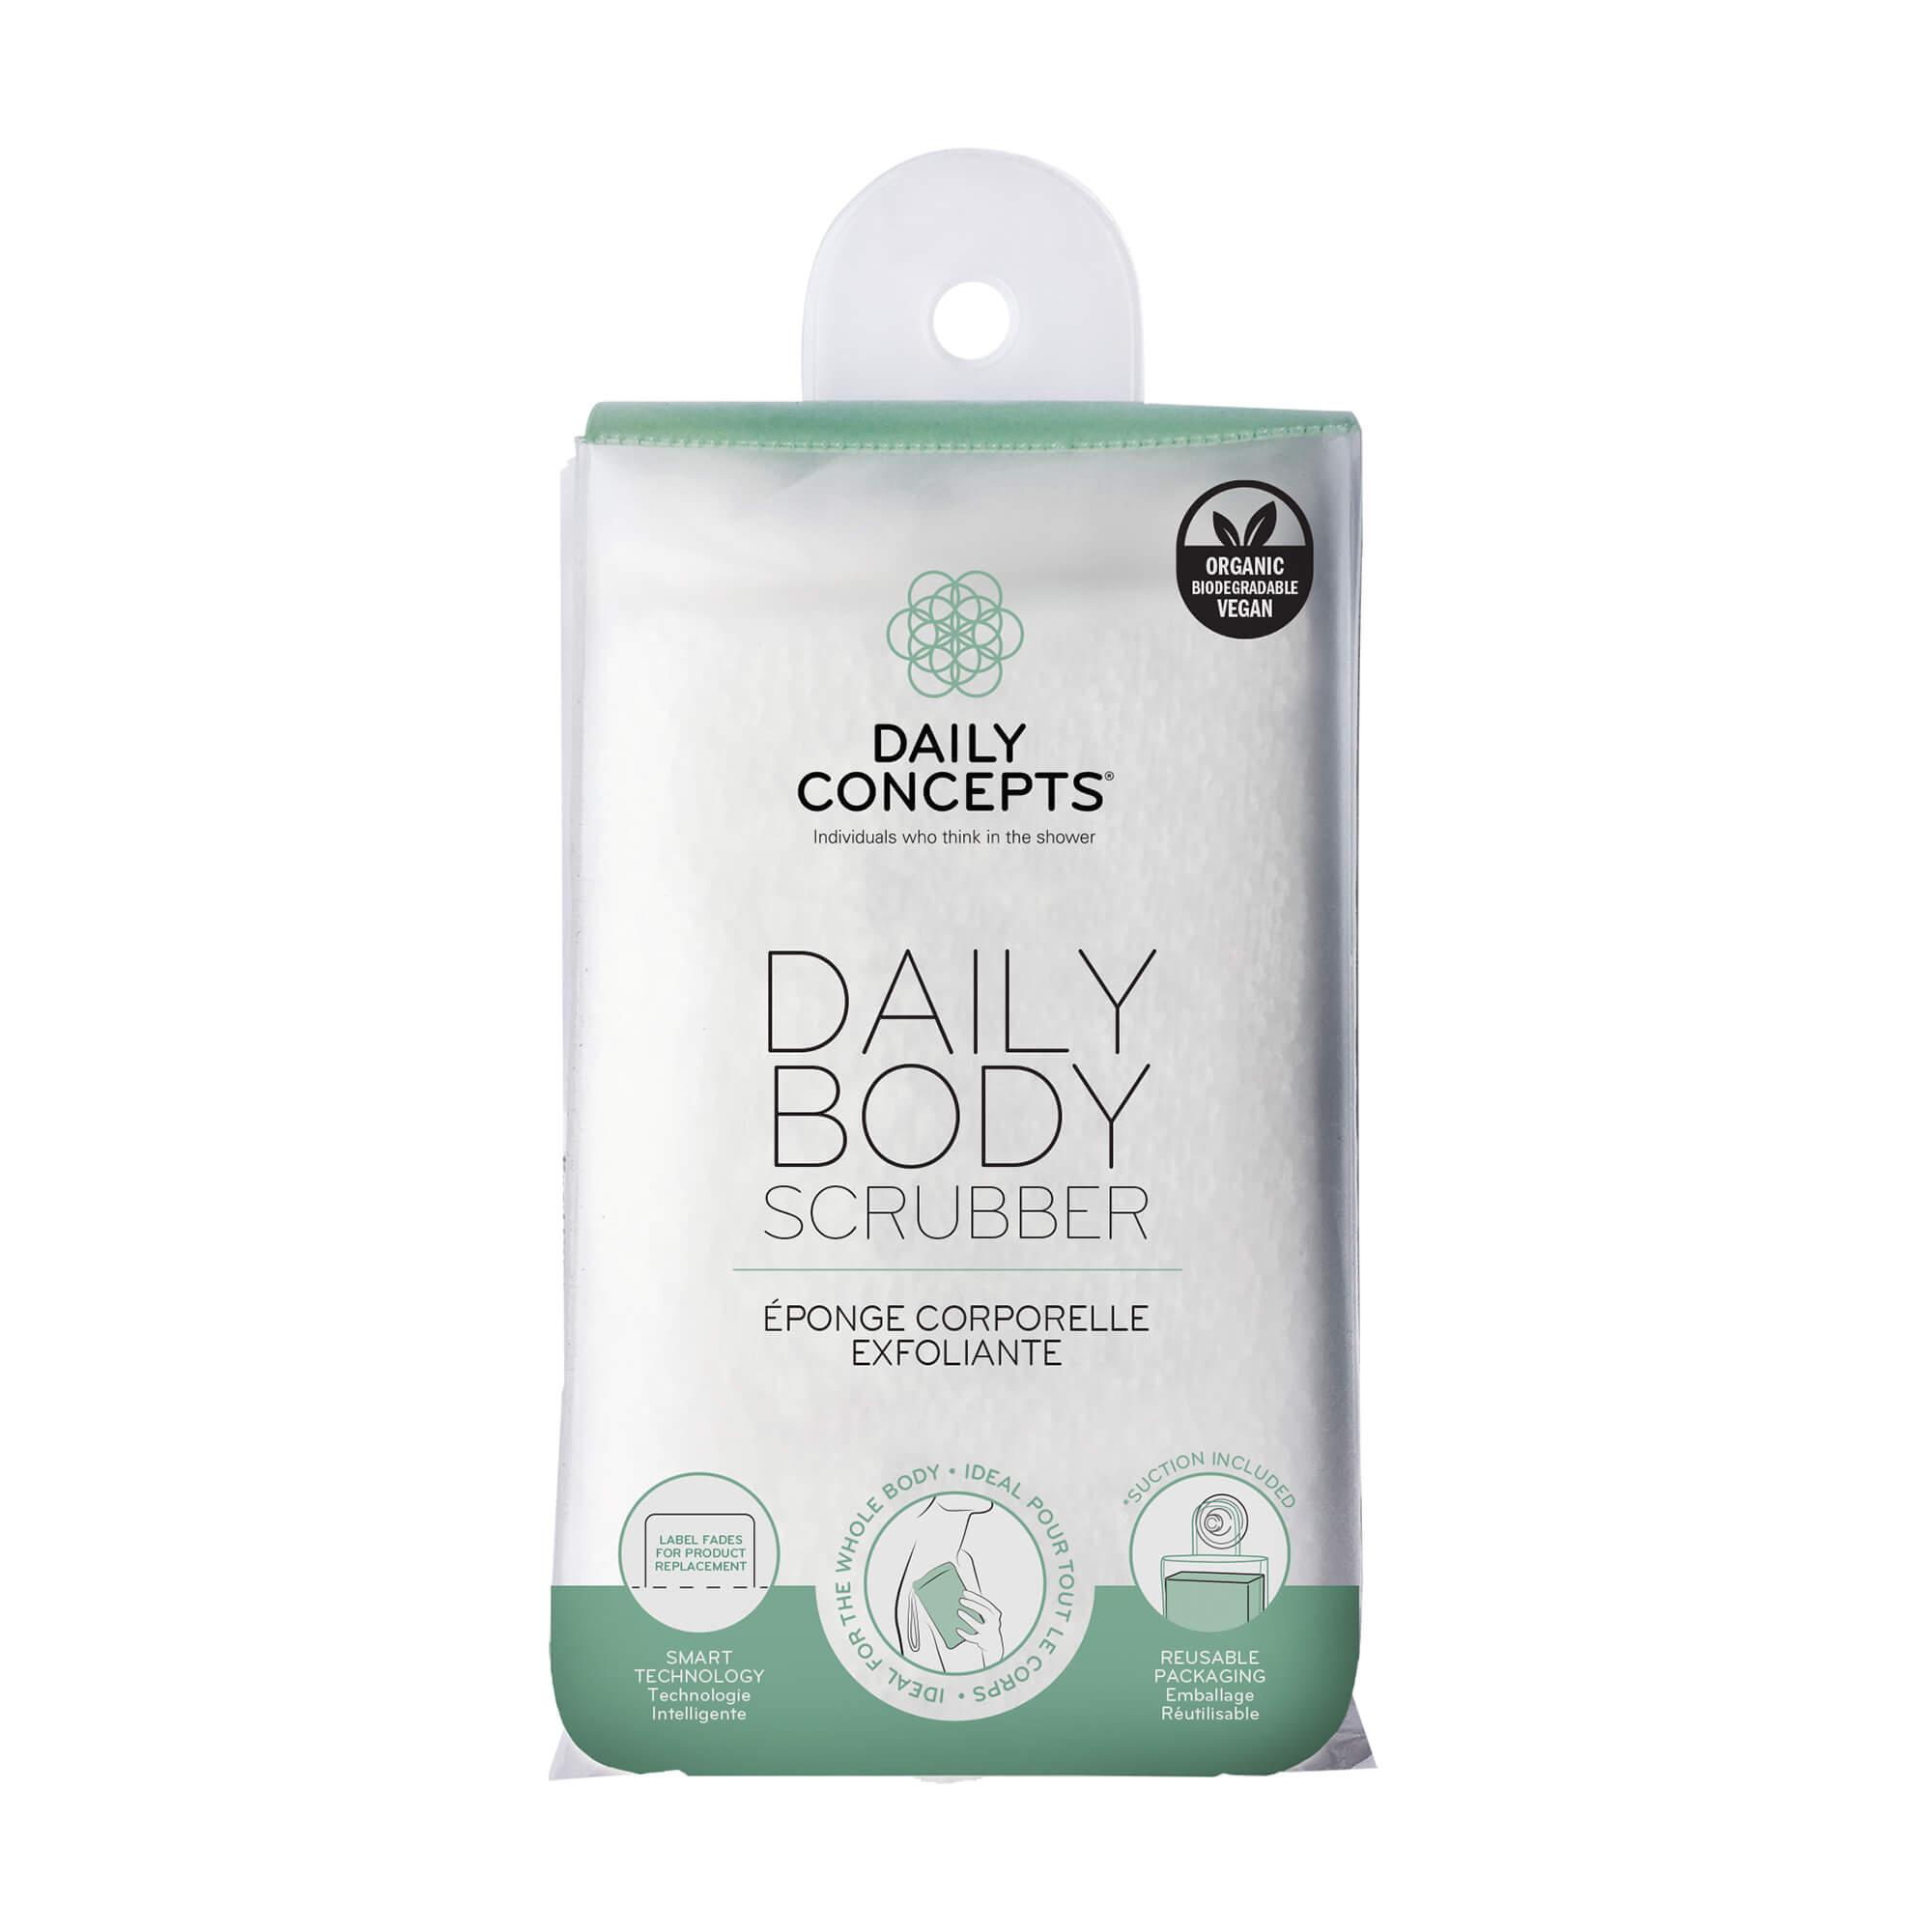 Daily Body Scrubber by Daily Concepts luxury Spa goods – DAILY CONCEPTS